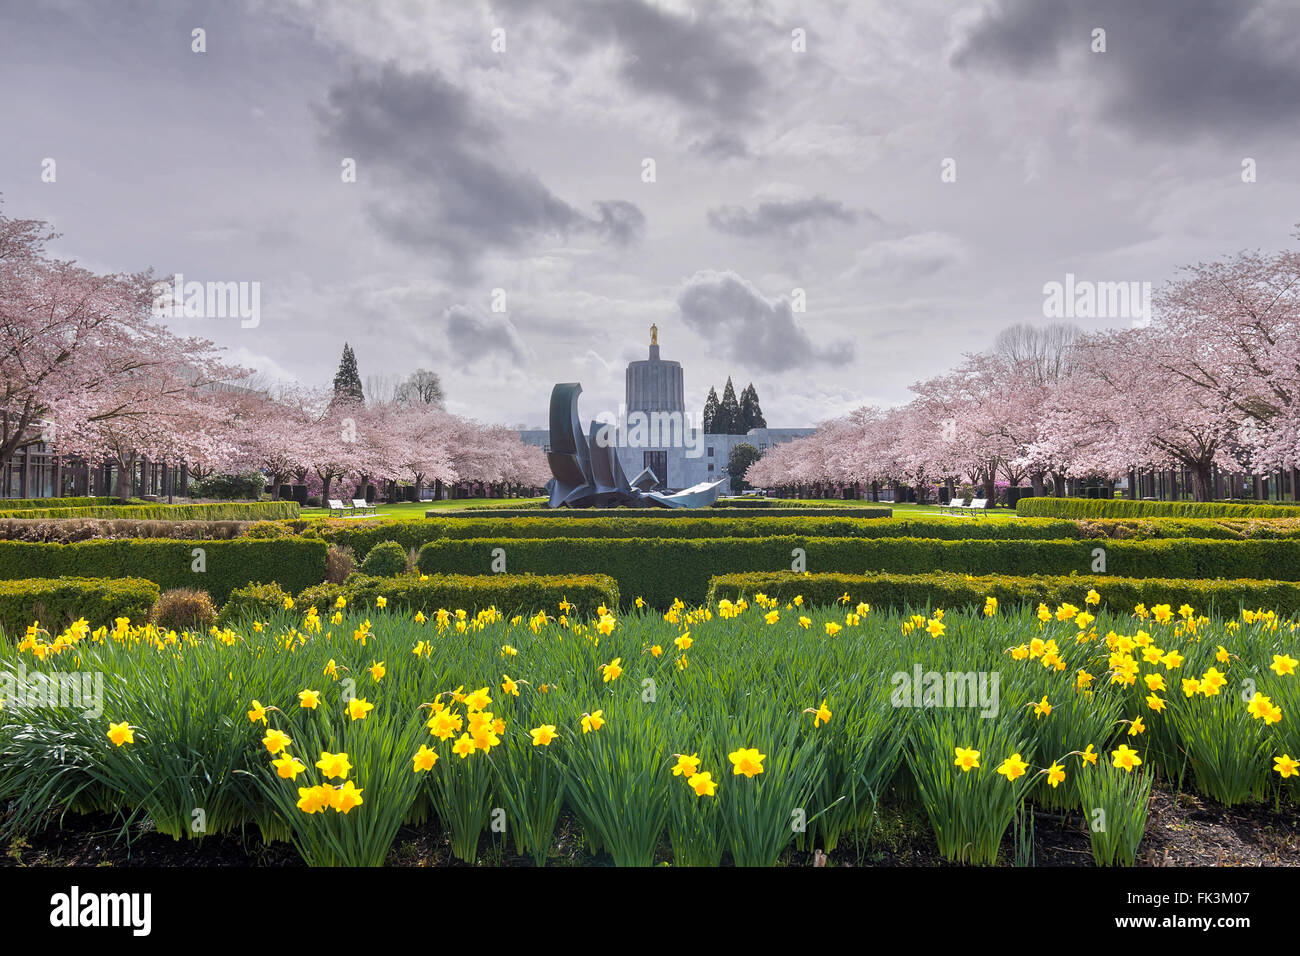 Oregon State Capitol Building in Salem Oregon with Daffodil flowers  and cherry blossom trees in spring season Stock Photo